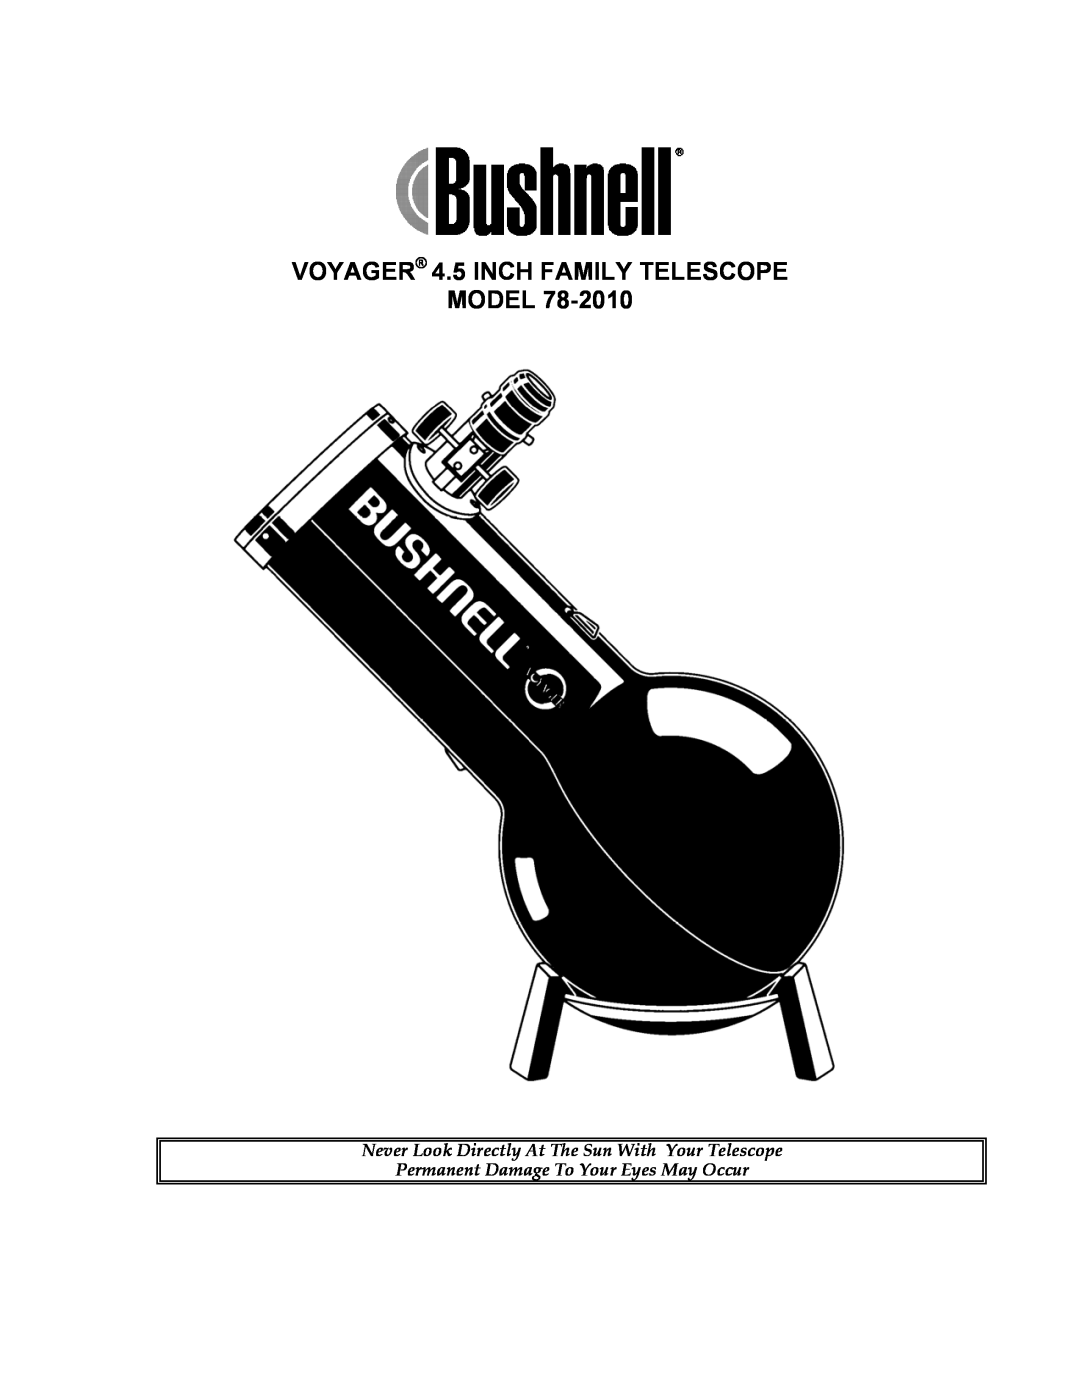 Bushnell 78-2010 manual VOYAGER 4.5 INCH FAMILY TELESCOPE MODEL, Permanent Damage To Your Eyes May Occur 